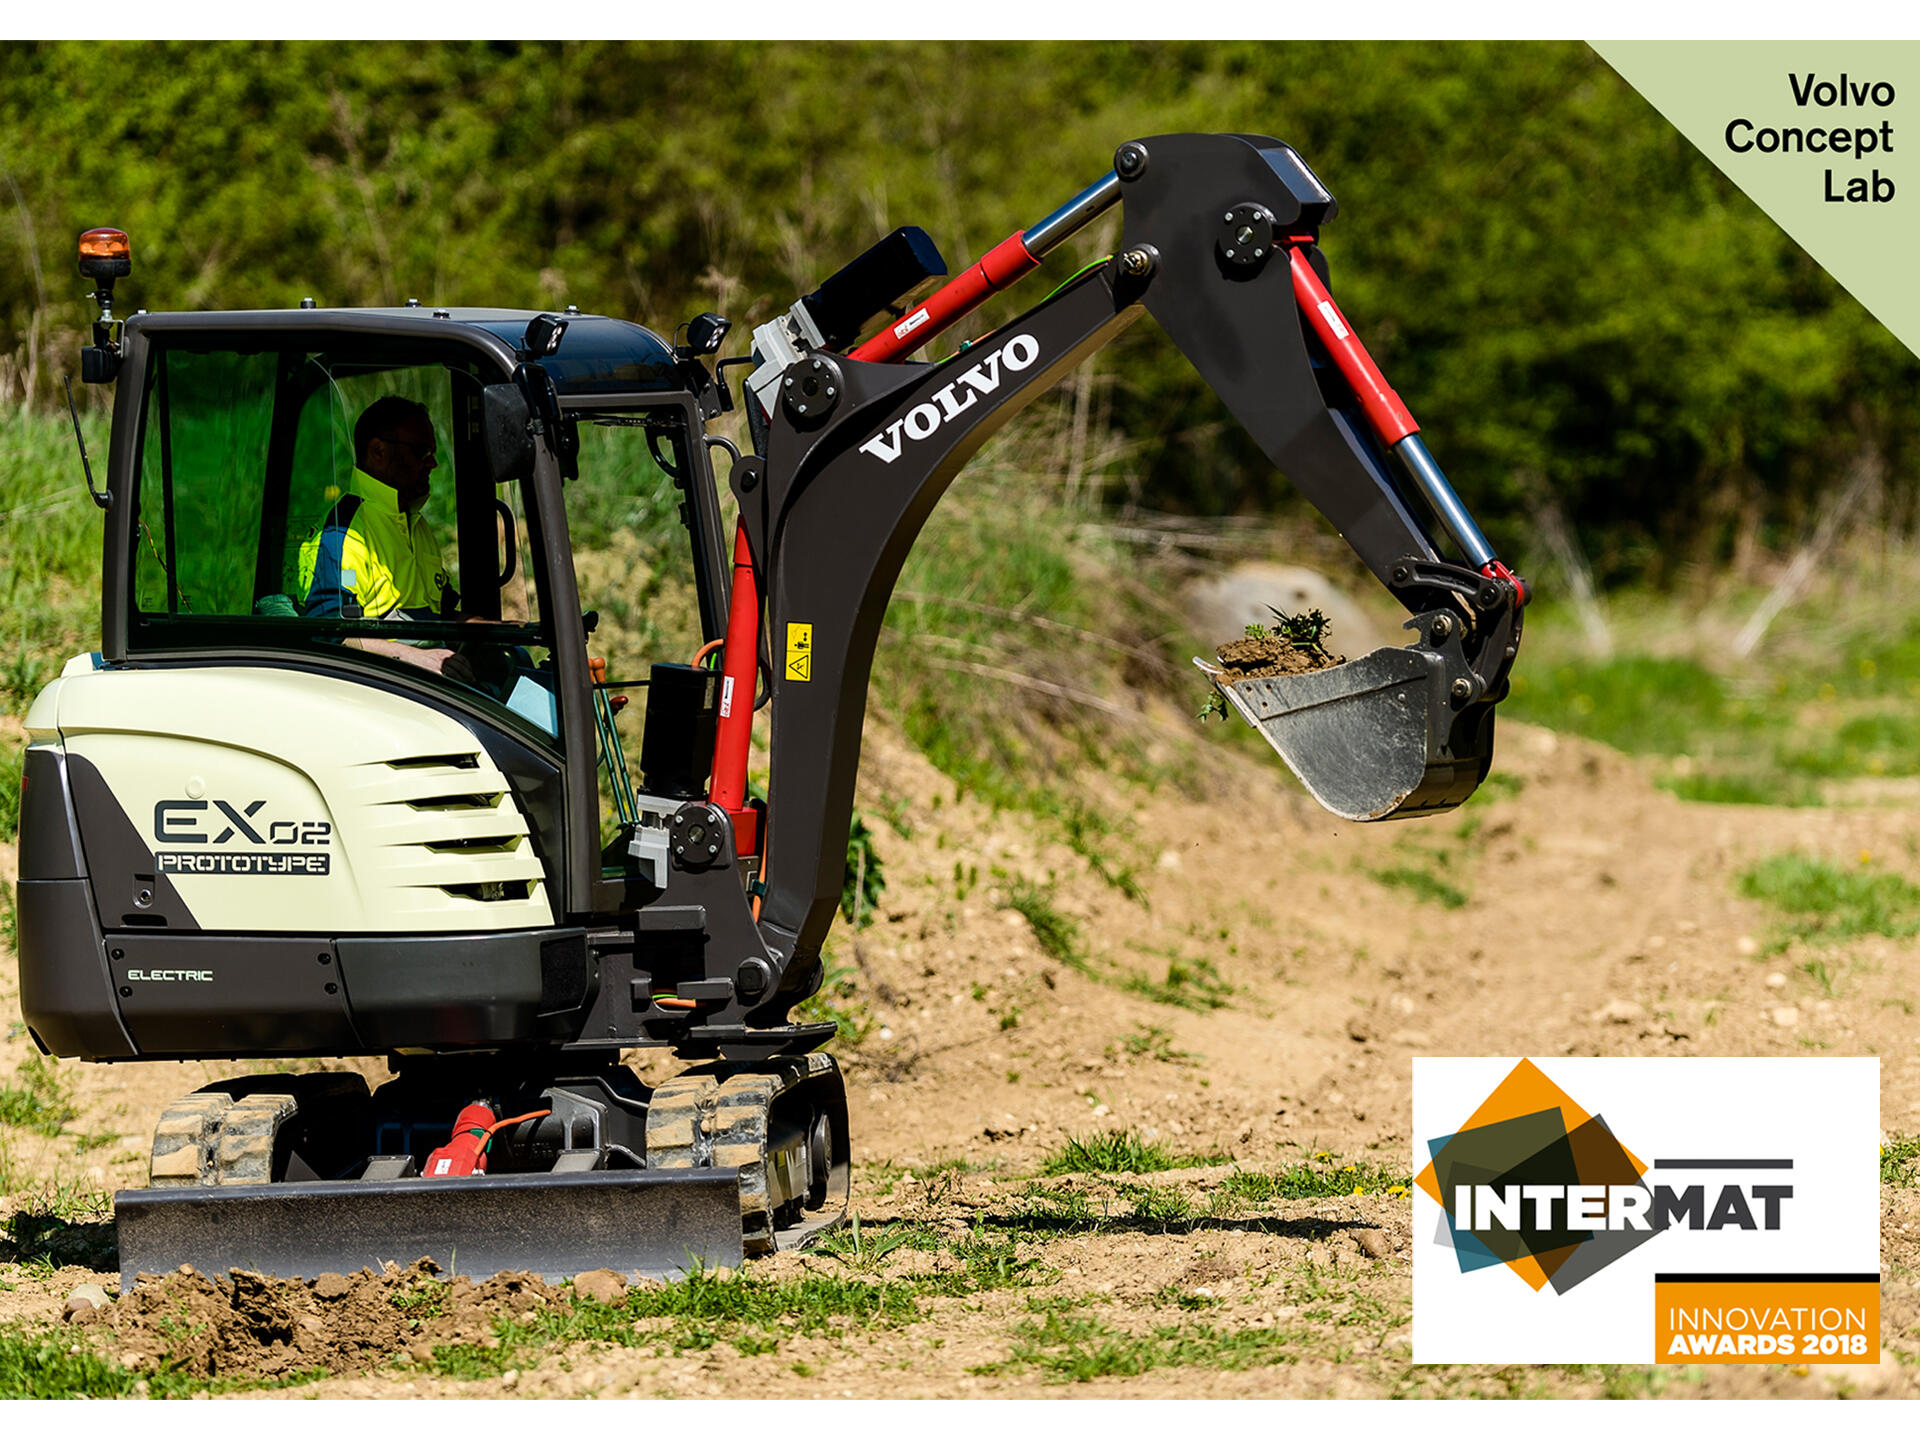 volvo-ce-fully-electric-compact-excavator-prototype-wins-intermat-innovation-award-03-1920x1440